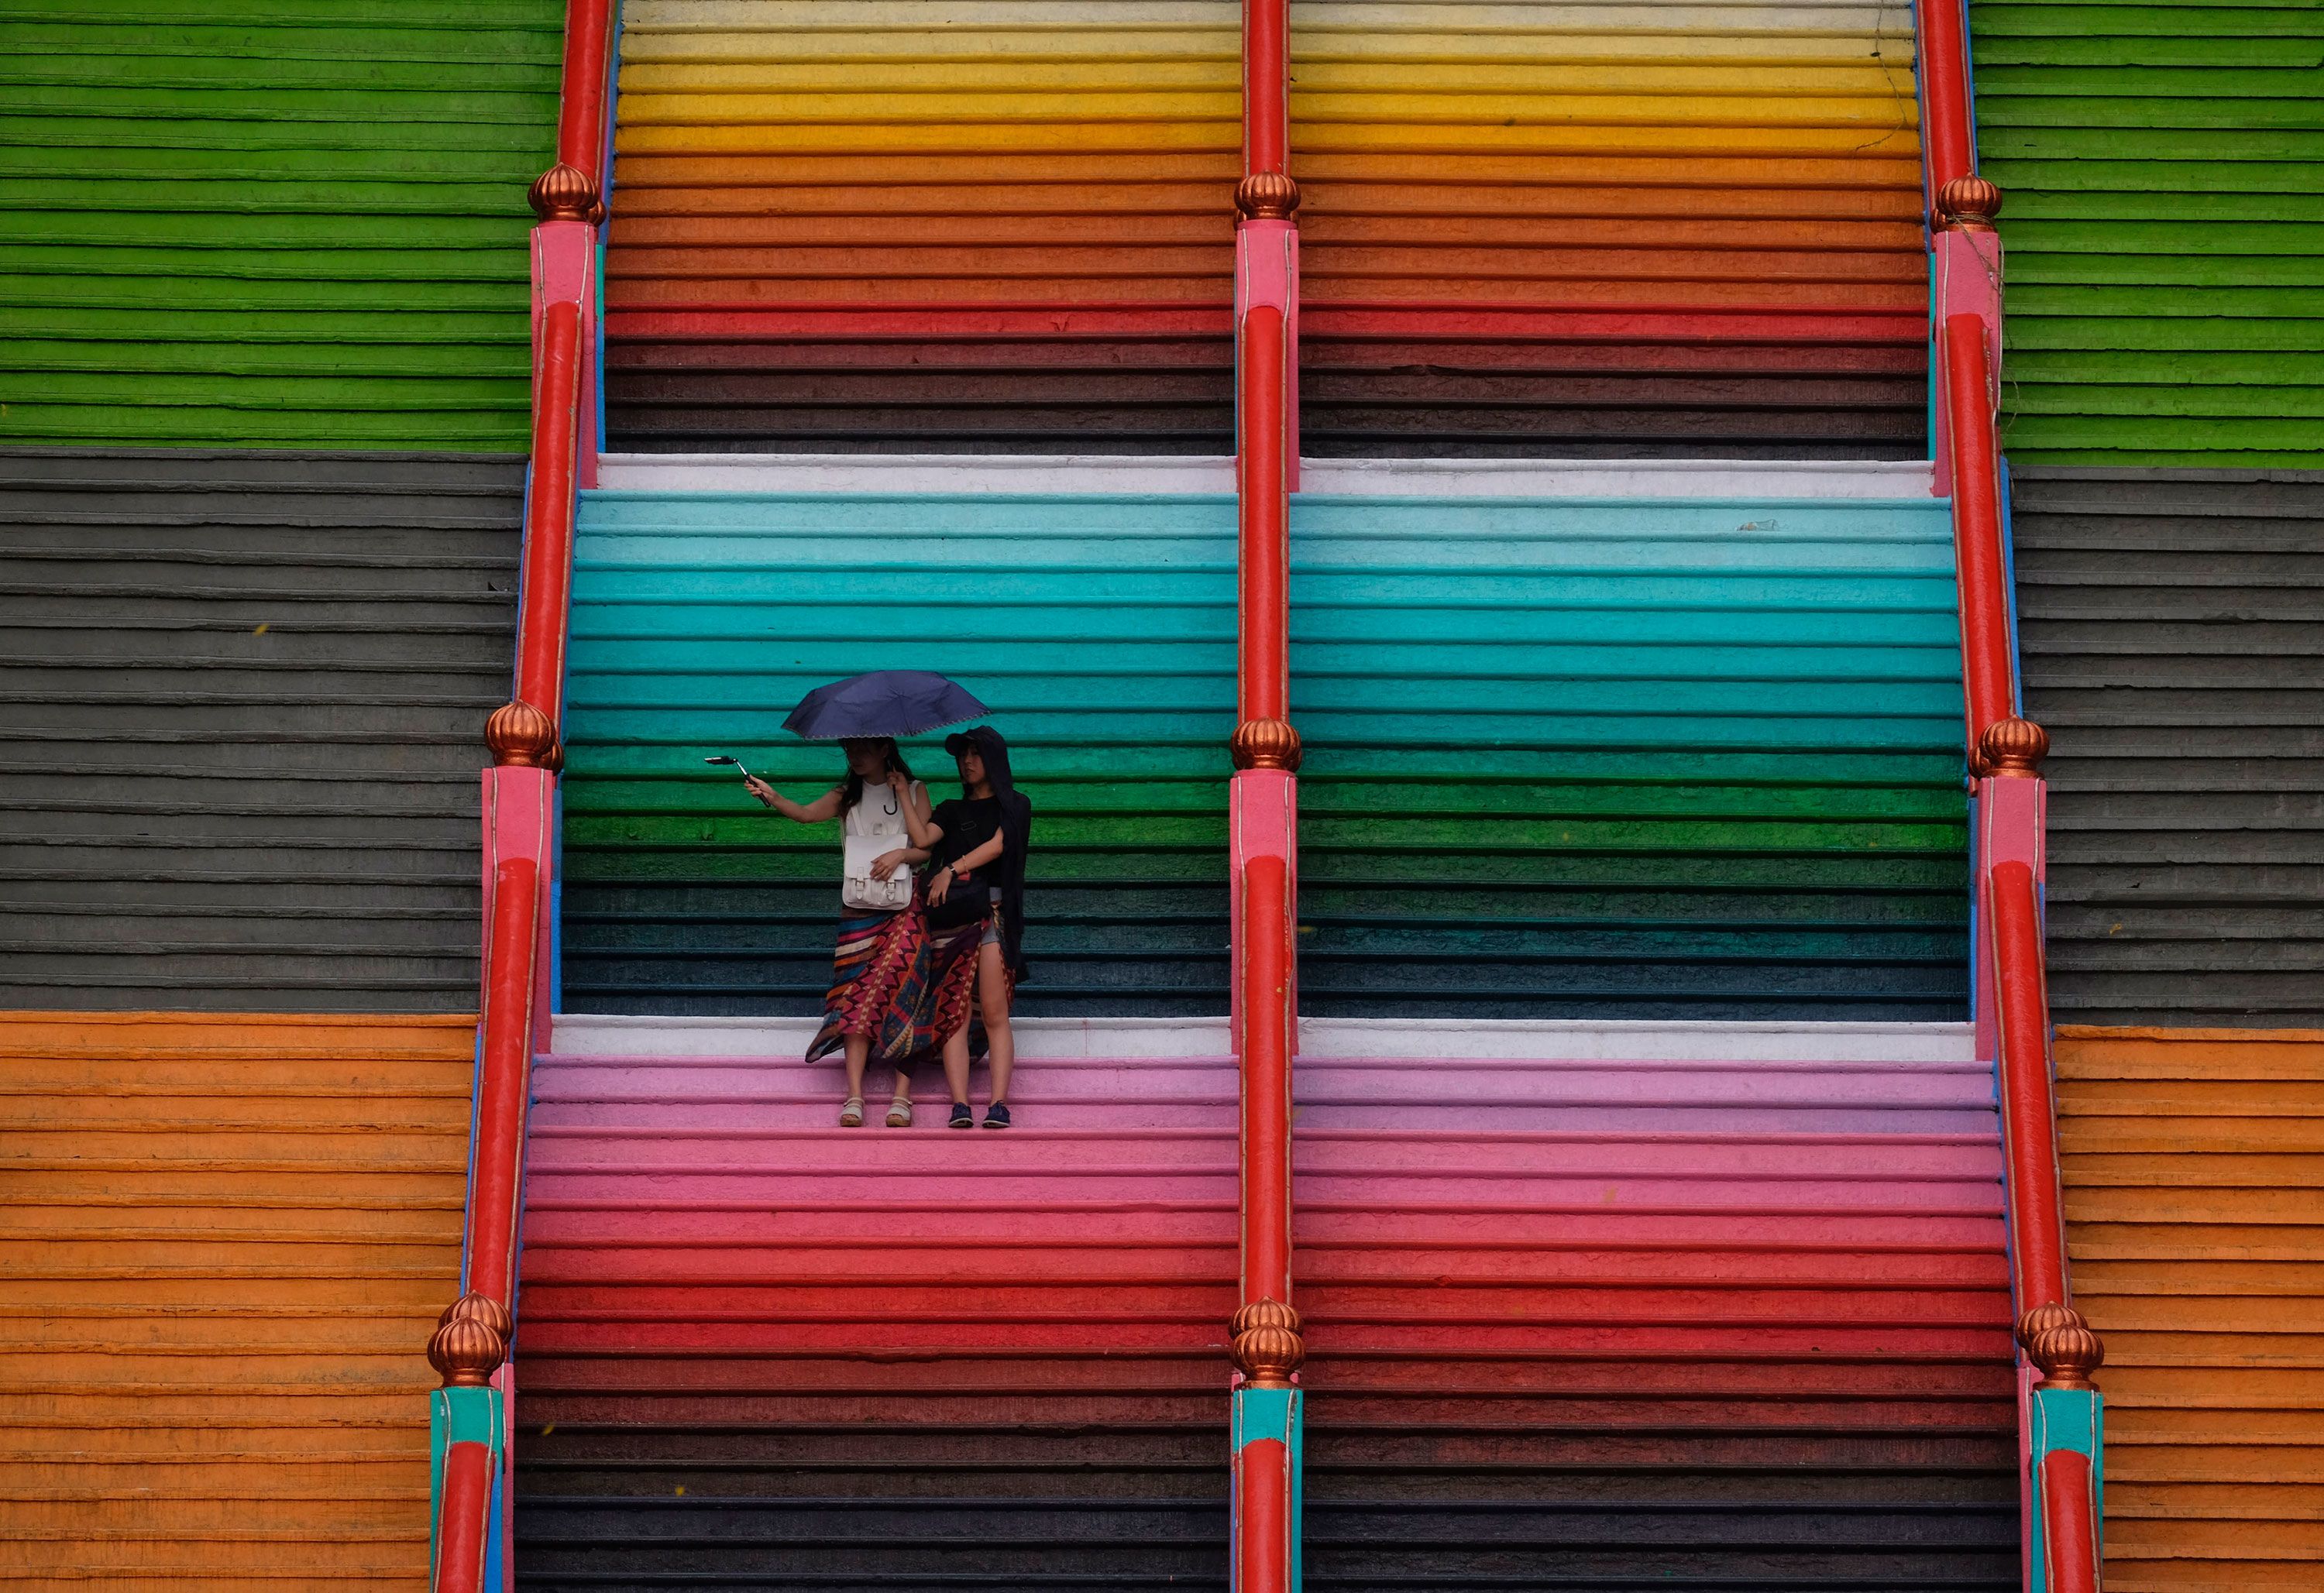 BATU CAVES, MALAYSIA - SEPTEMBER 1: Brightly painted visitors take photos on the 272-step staircase leading to the Sri Subramanian Swamy Temple in Batu Caves, Malaysia on September 1, 2018.  The Sri Subramaniar Swamy Temple has been painted like a rainbow and the temple has been given a colorful new look, a rejuvenation process that is done once in 12 years and is part of the Hindu rituals for its devotees.  (Photo by Mohammad Samsul Mohammad Said/Getty Images)